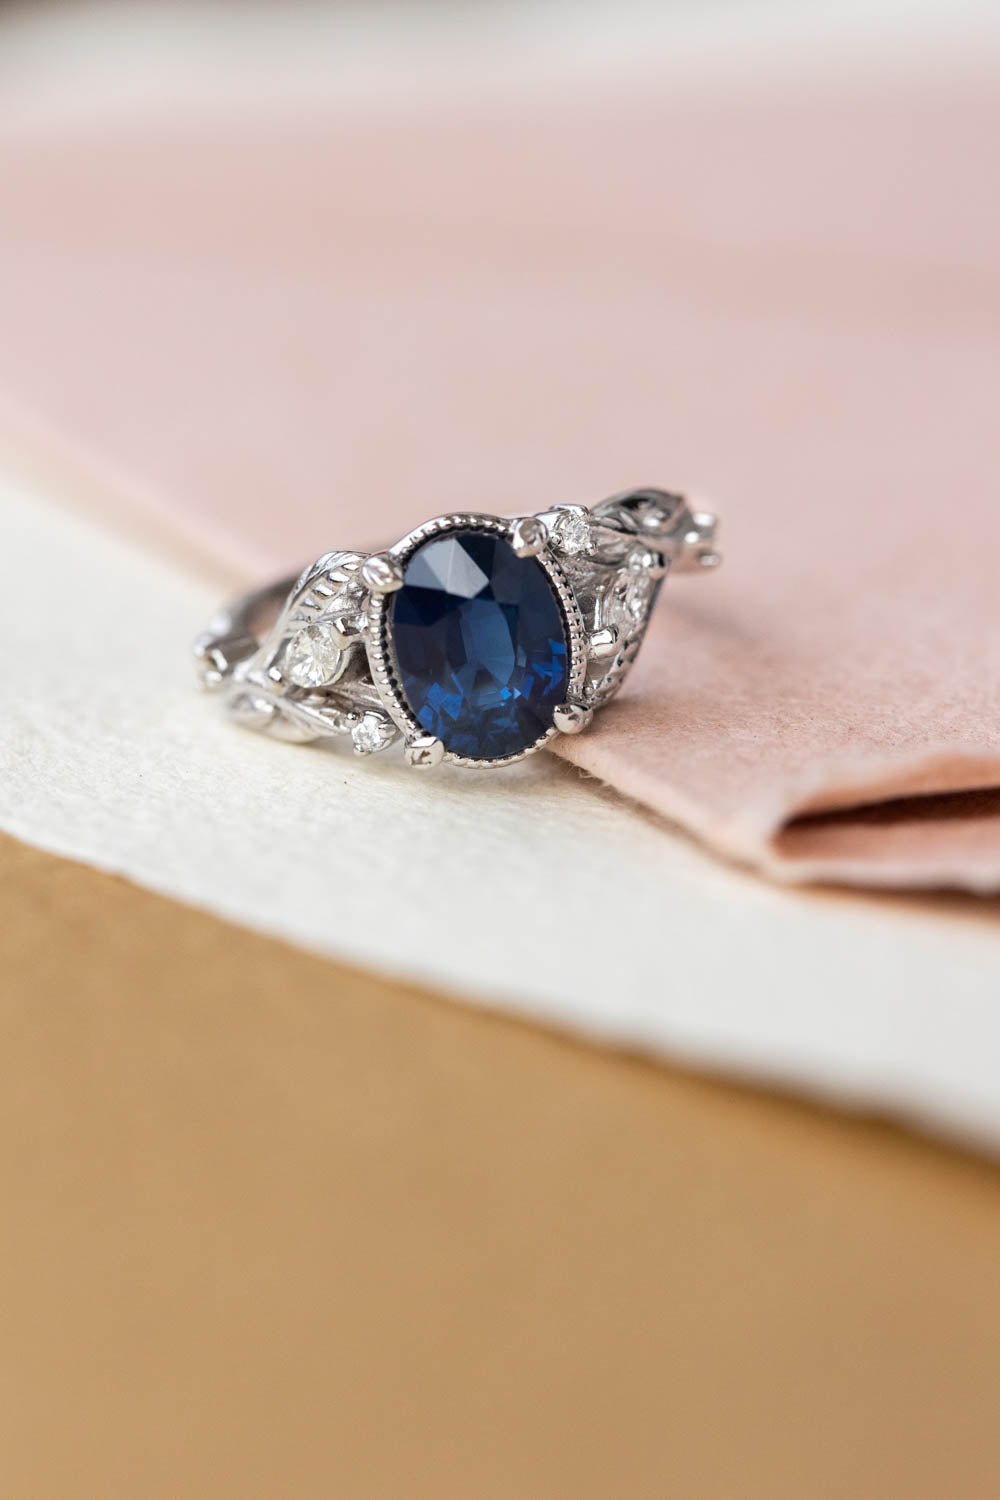 Royal blue sapphire engagement ring, nature inspired white gold proposal ring with diamonds / Patricia - Eden Garden Jewelry™